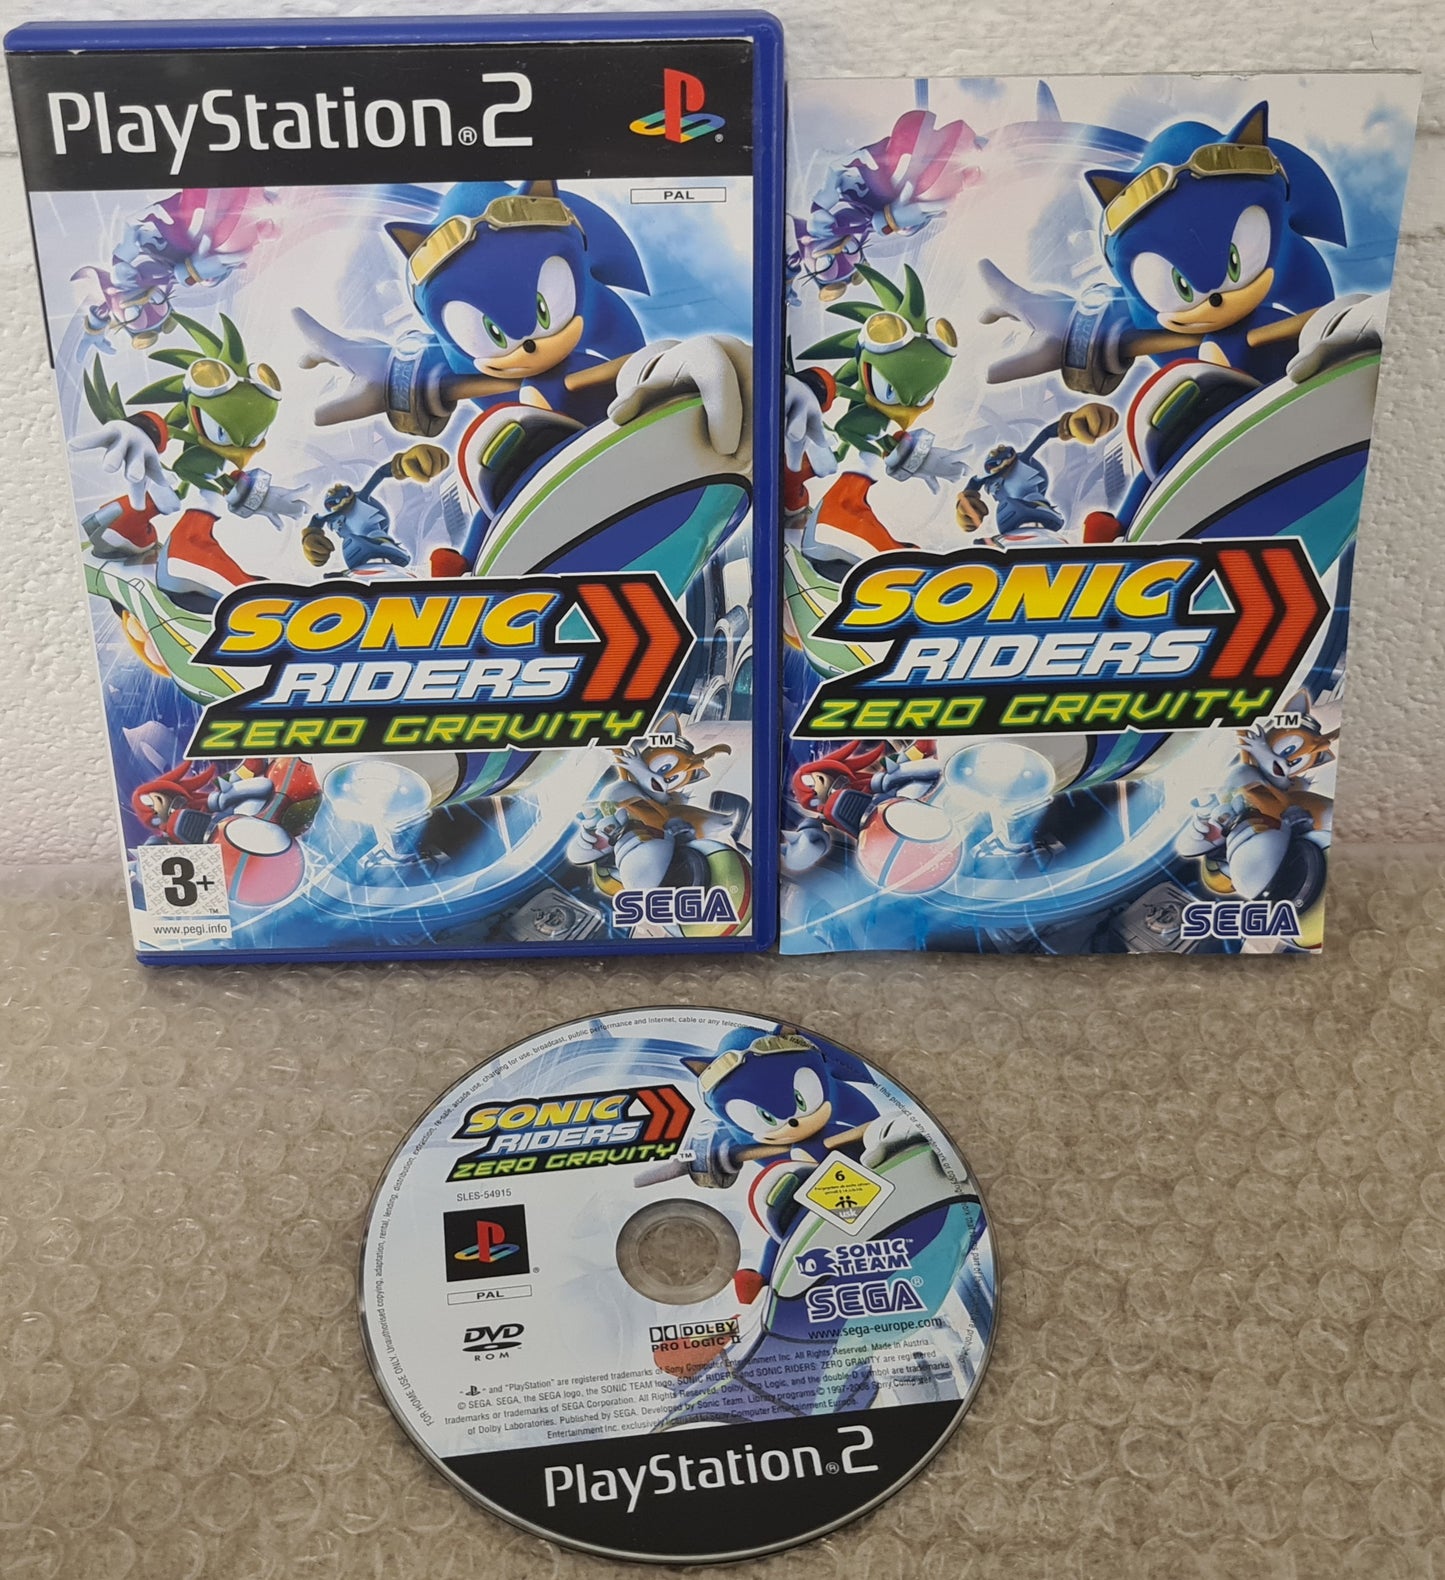 Sonic Riders Zero Gravity Sony Playstation 2 (PS2) Game